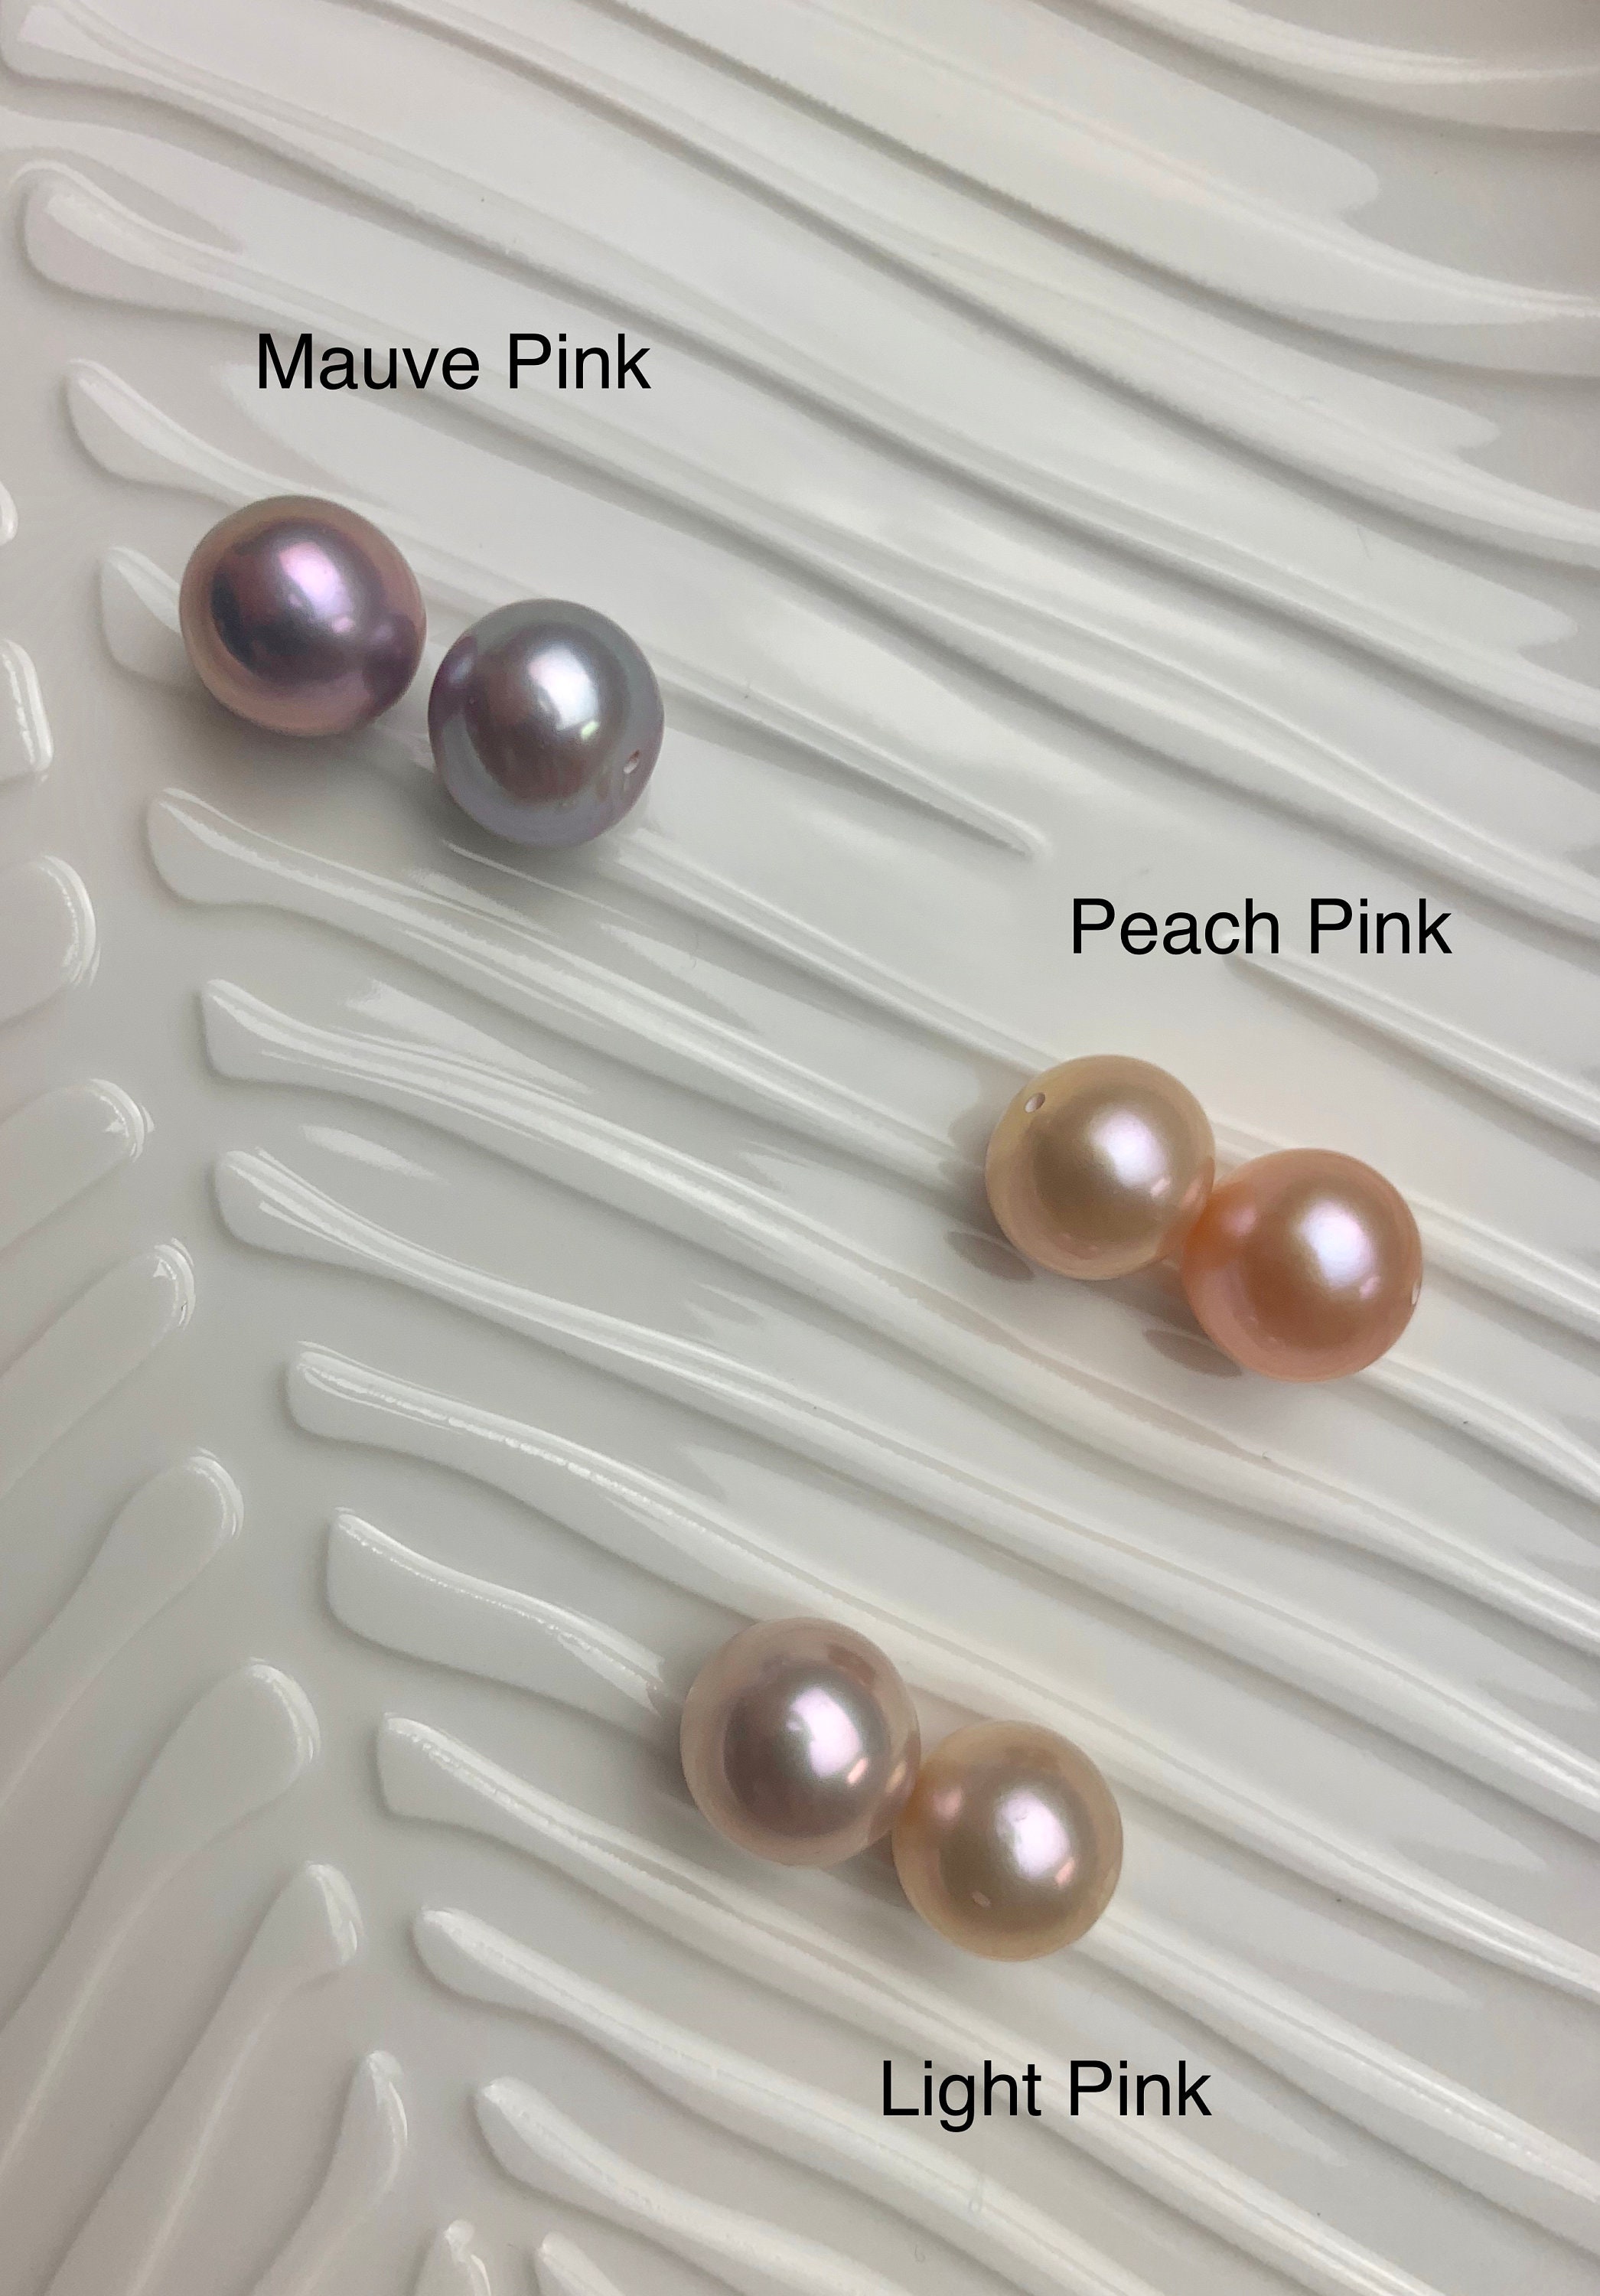 8-8.5 Mm AAA Gray Semi-round Freshwater Pearls Genuine Smooth and Round Pearl  Beads High Luster Pinkish Gray Color Freshwater Pearls 535 